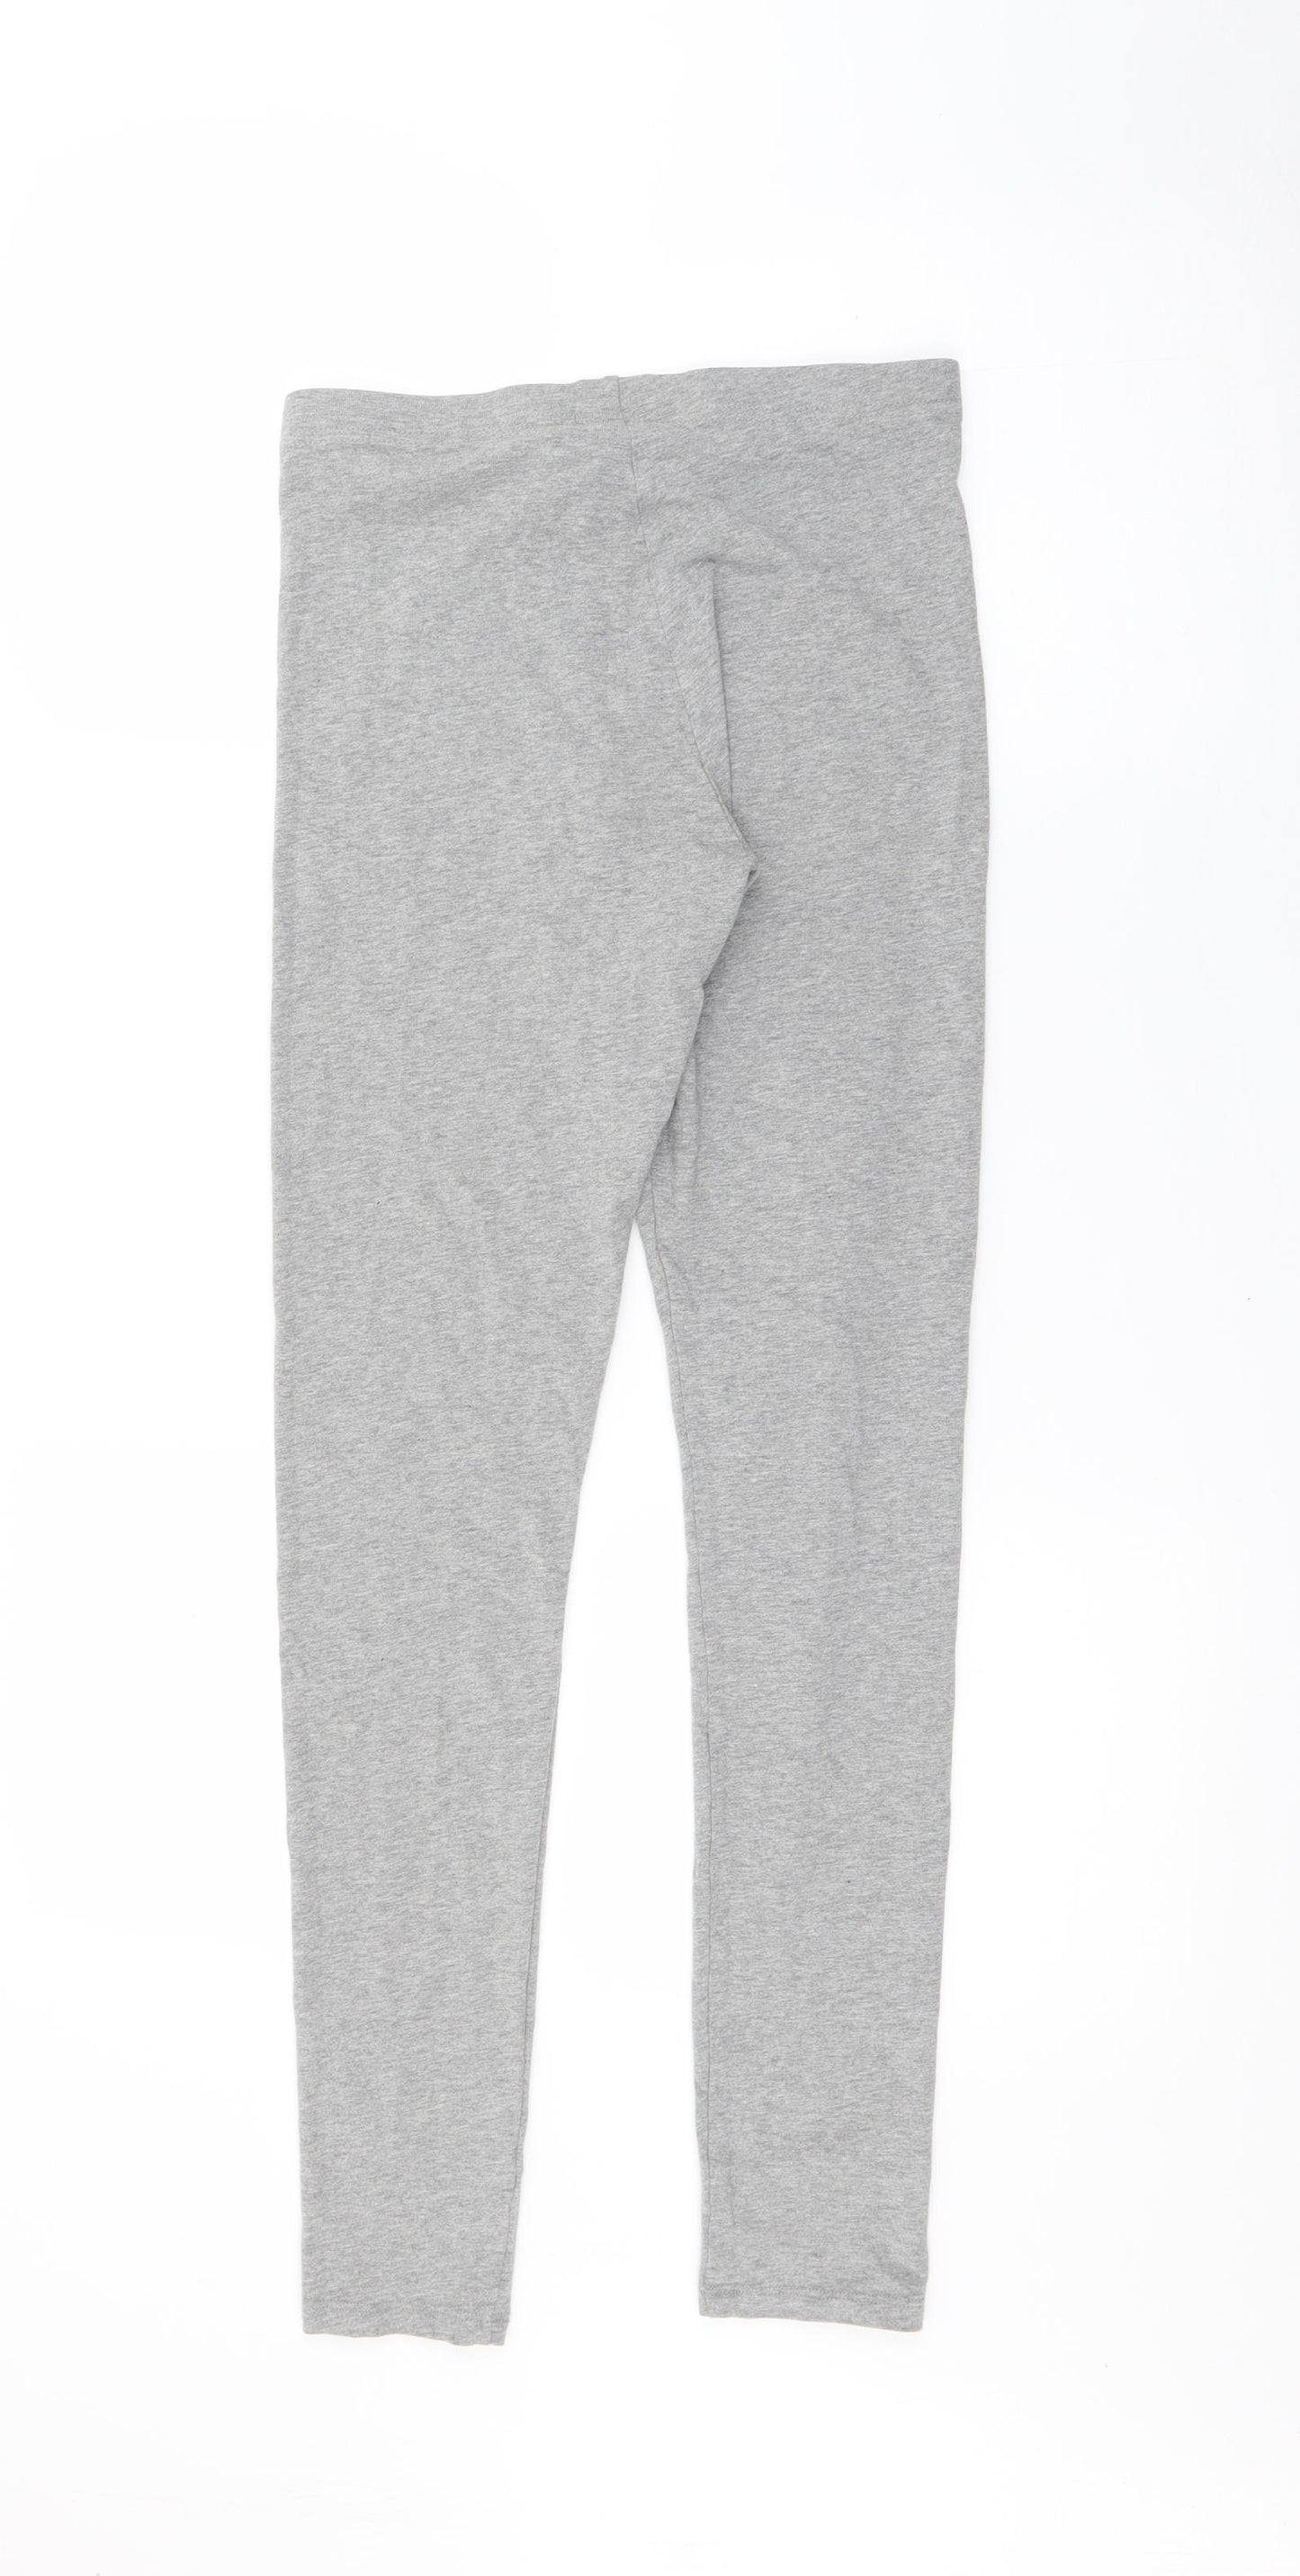 F&F Girls Grey  Cotton Pedal Pusher Trousers Size 13-14 Years  Regular